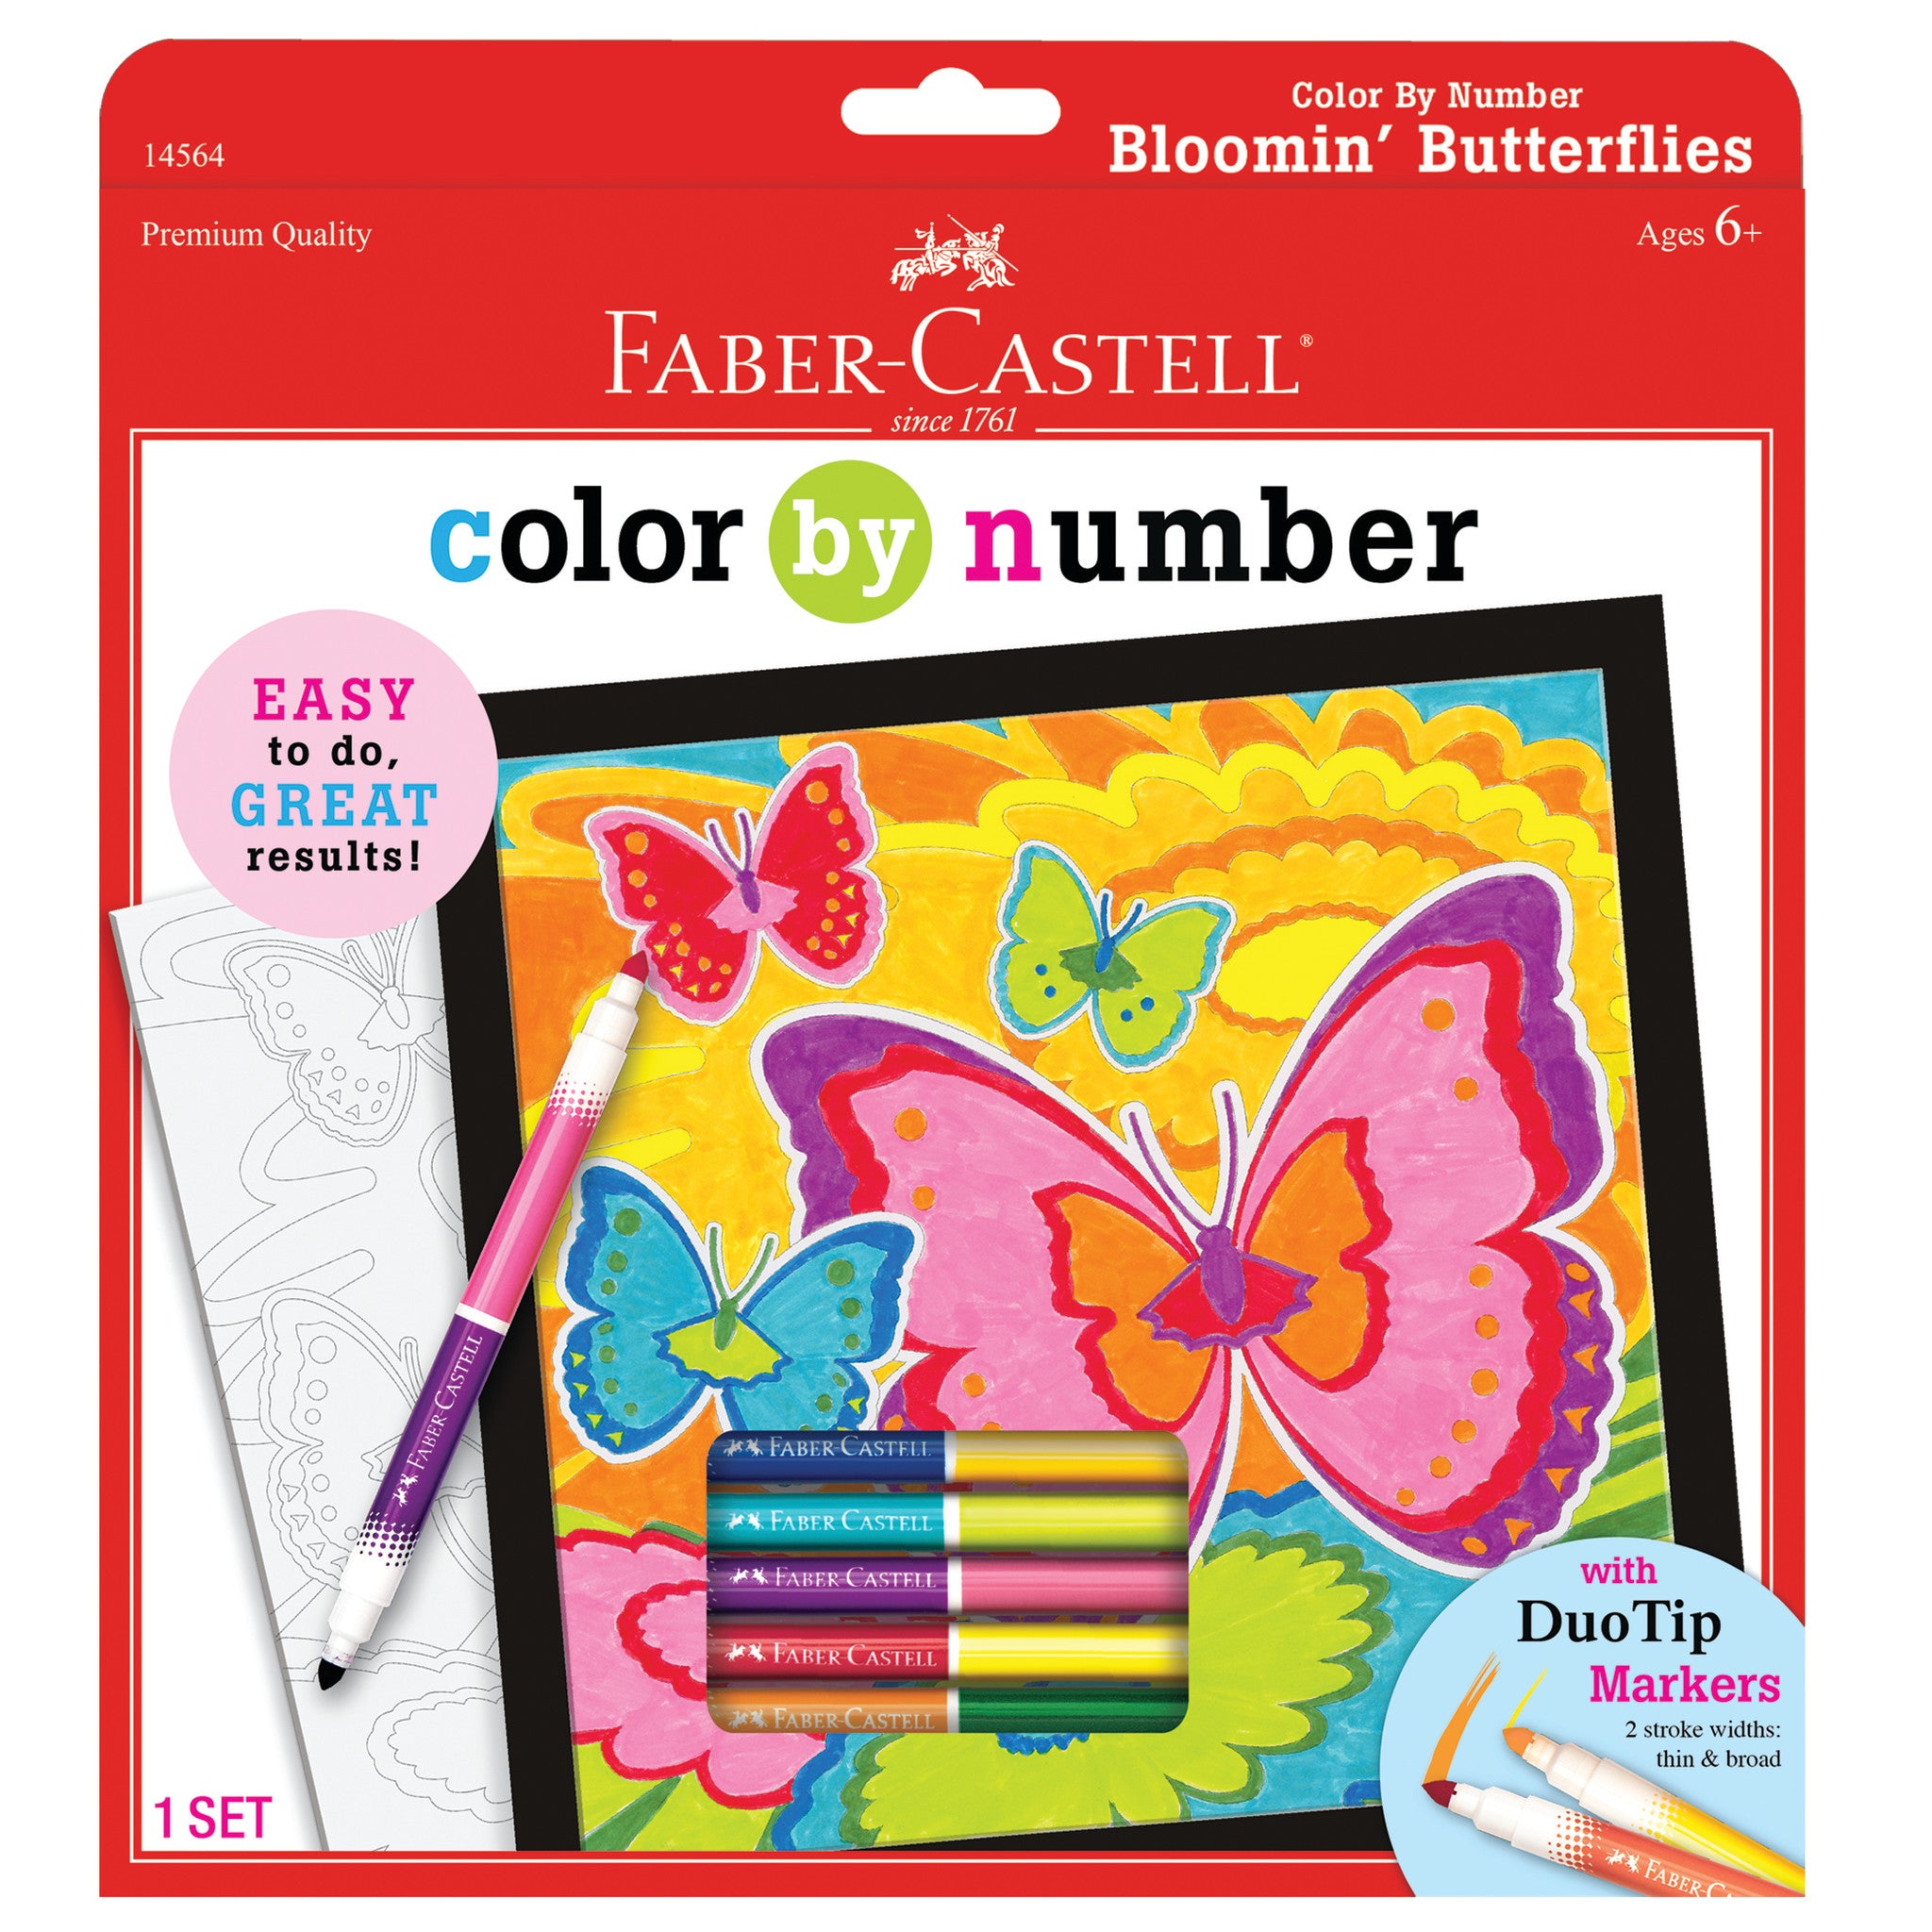 Color by Number with Markers Kits bloomin' butterflies (pack of 2)